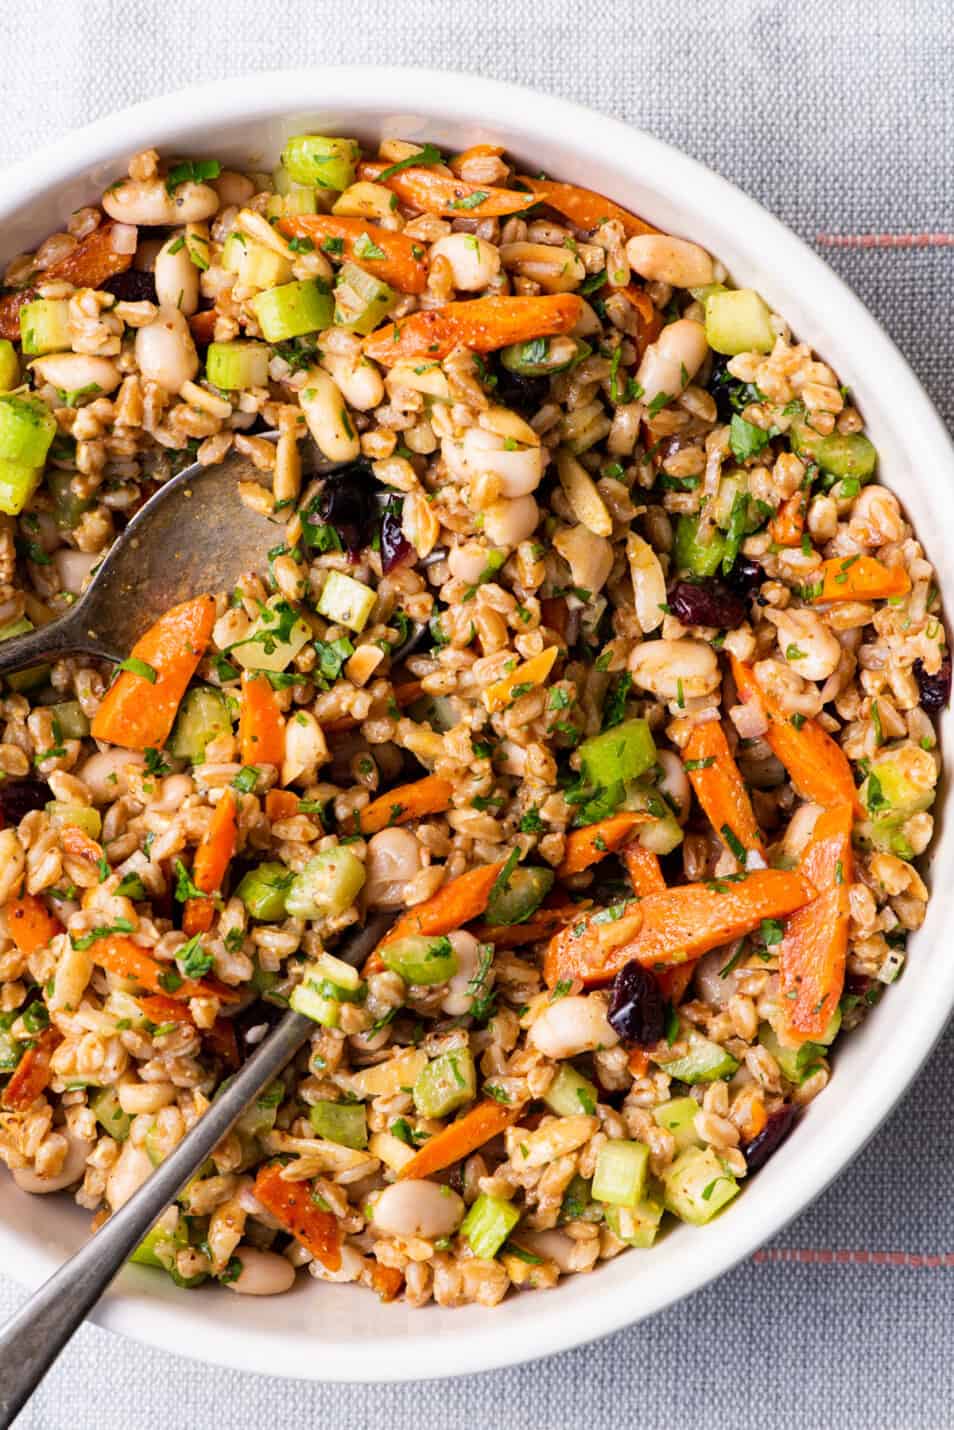 Plant-based Thanksgiving recipes: Fall farro salad with carrots, celery, cranberries, and almonds.